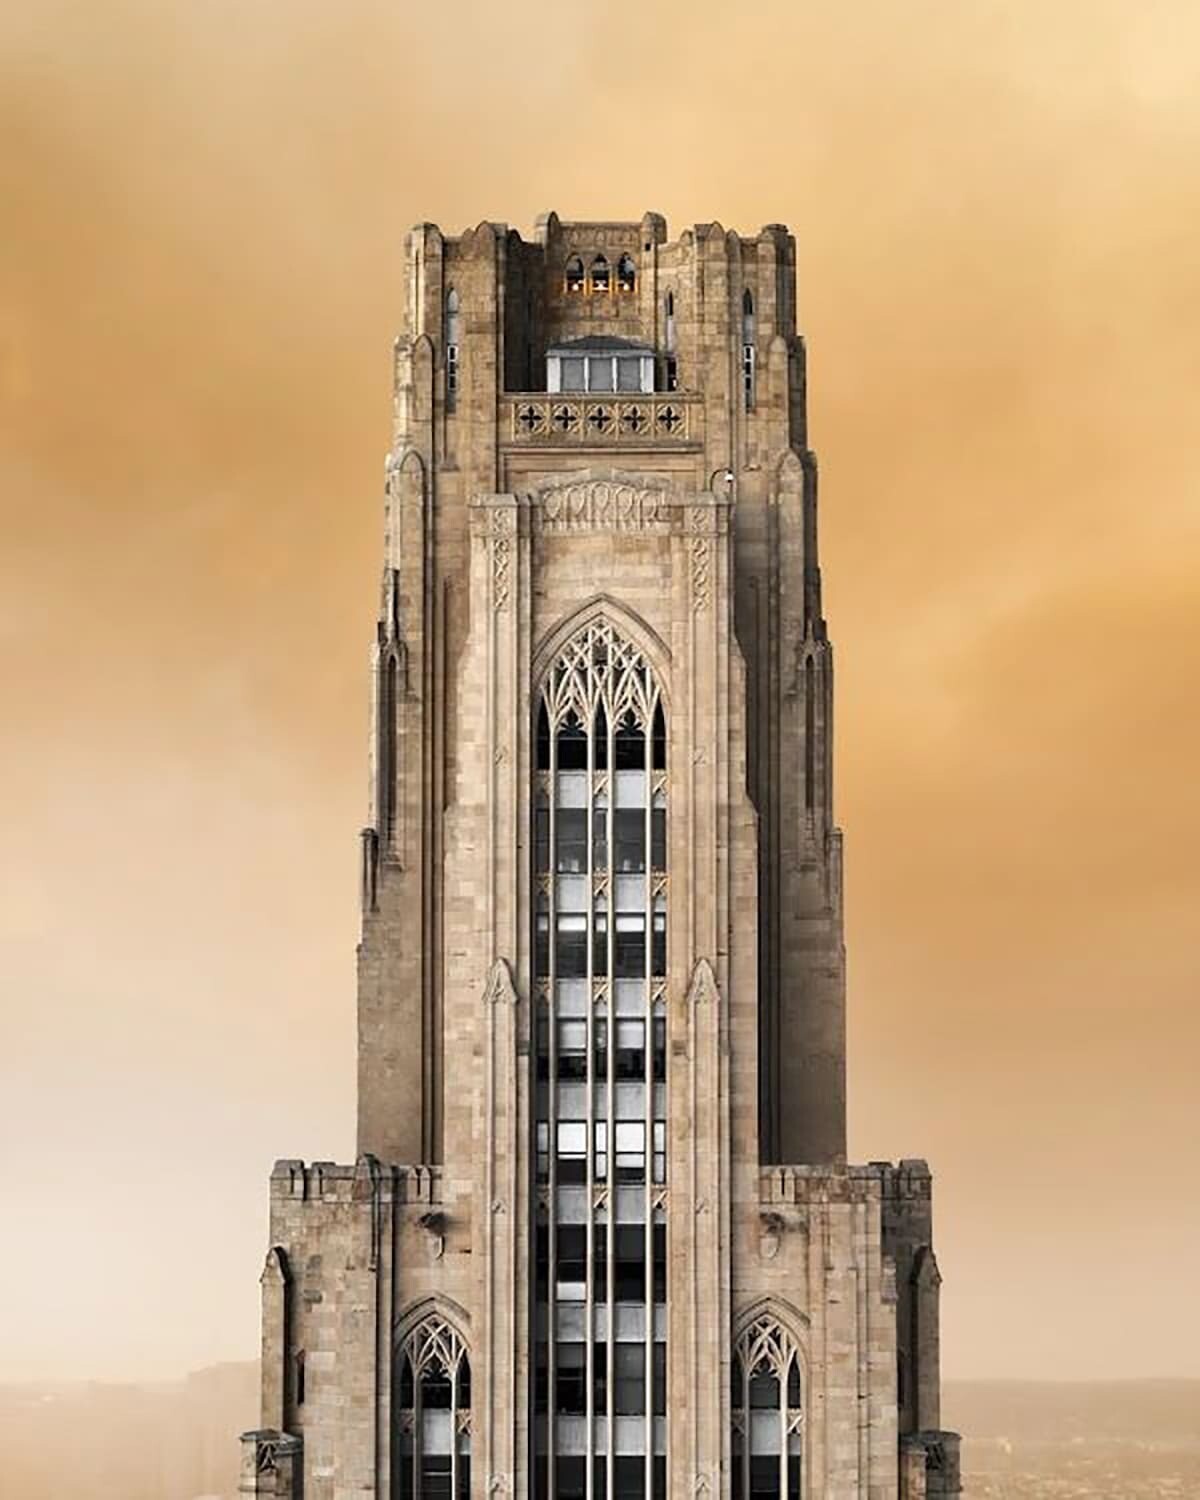 Cathedral of Learning in Pittsburgh